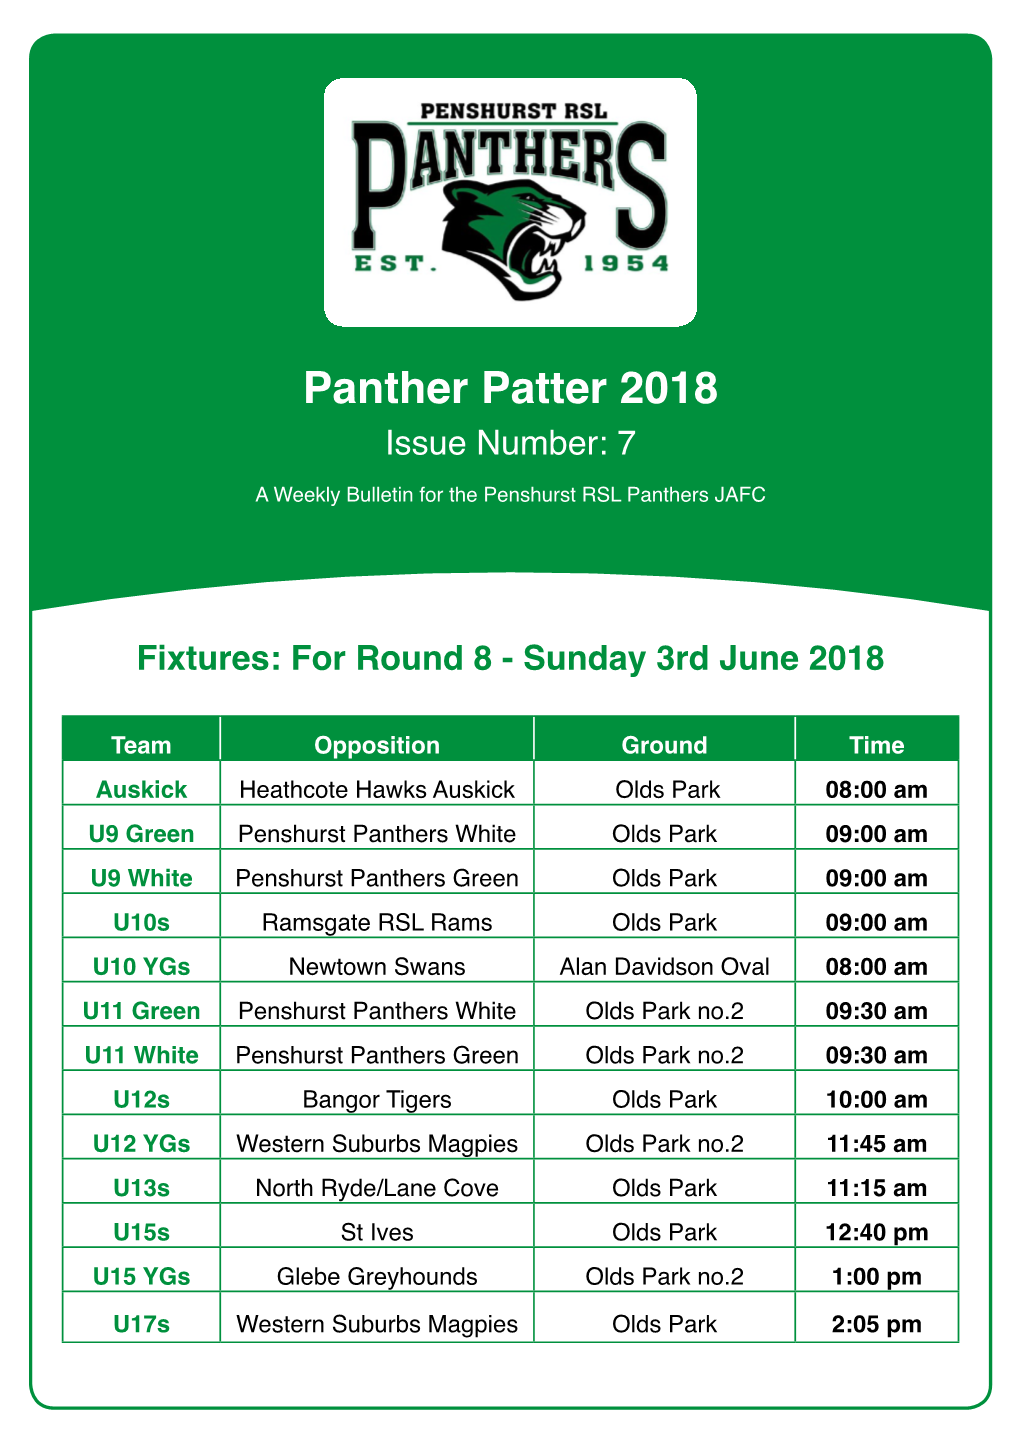 Panther Patter 2018 Issue Number: 7 a Weekly Bulletin for the Penshurst RSL Panthers JAFC